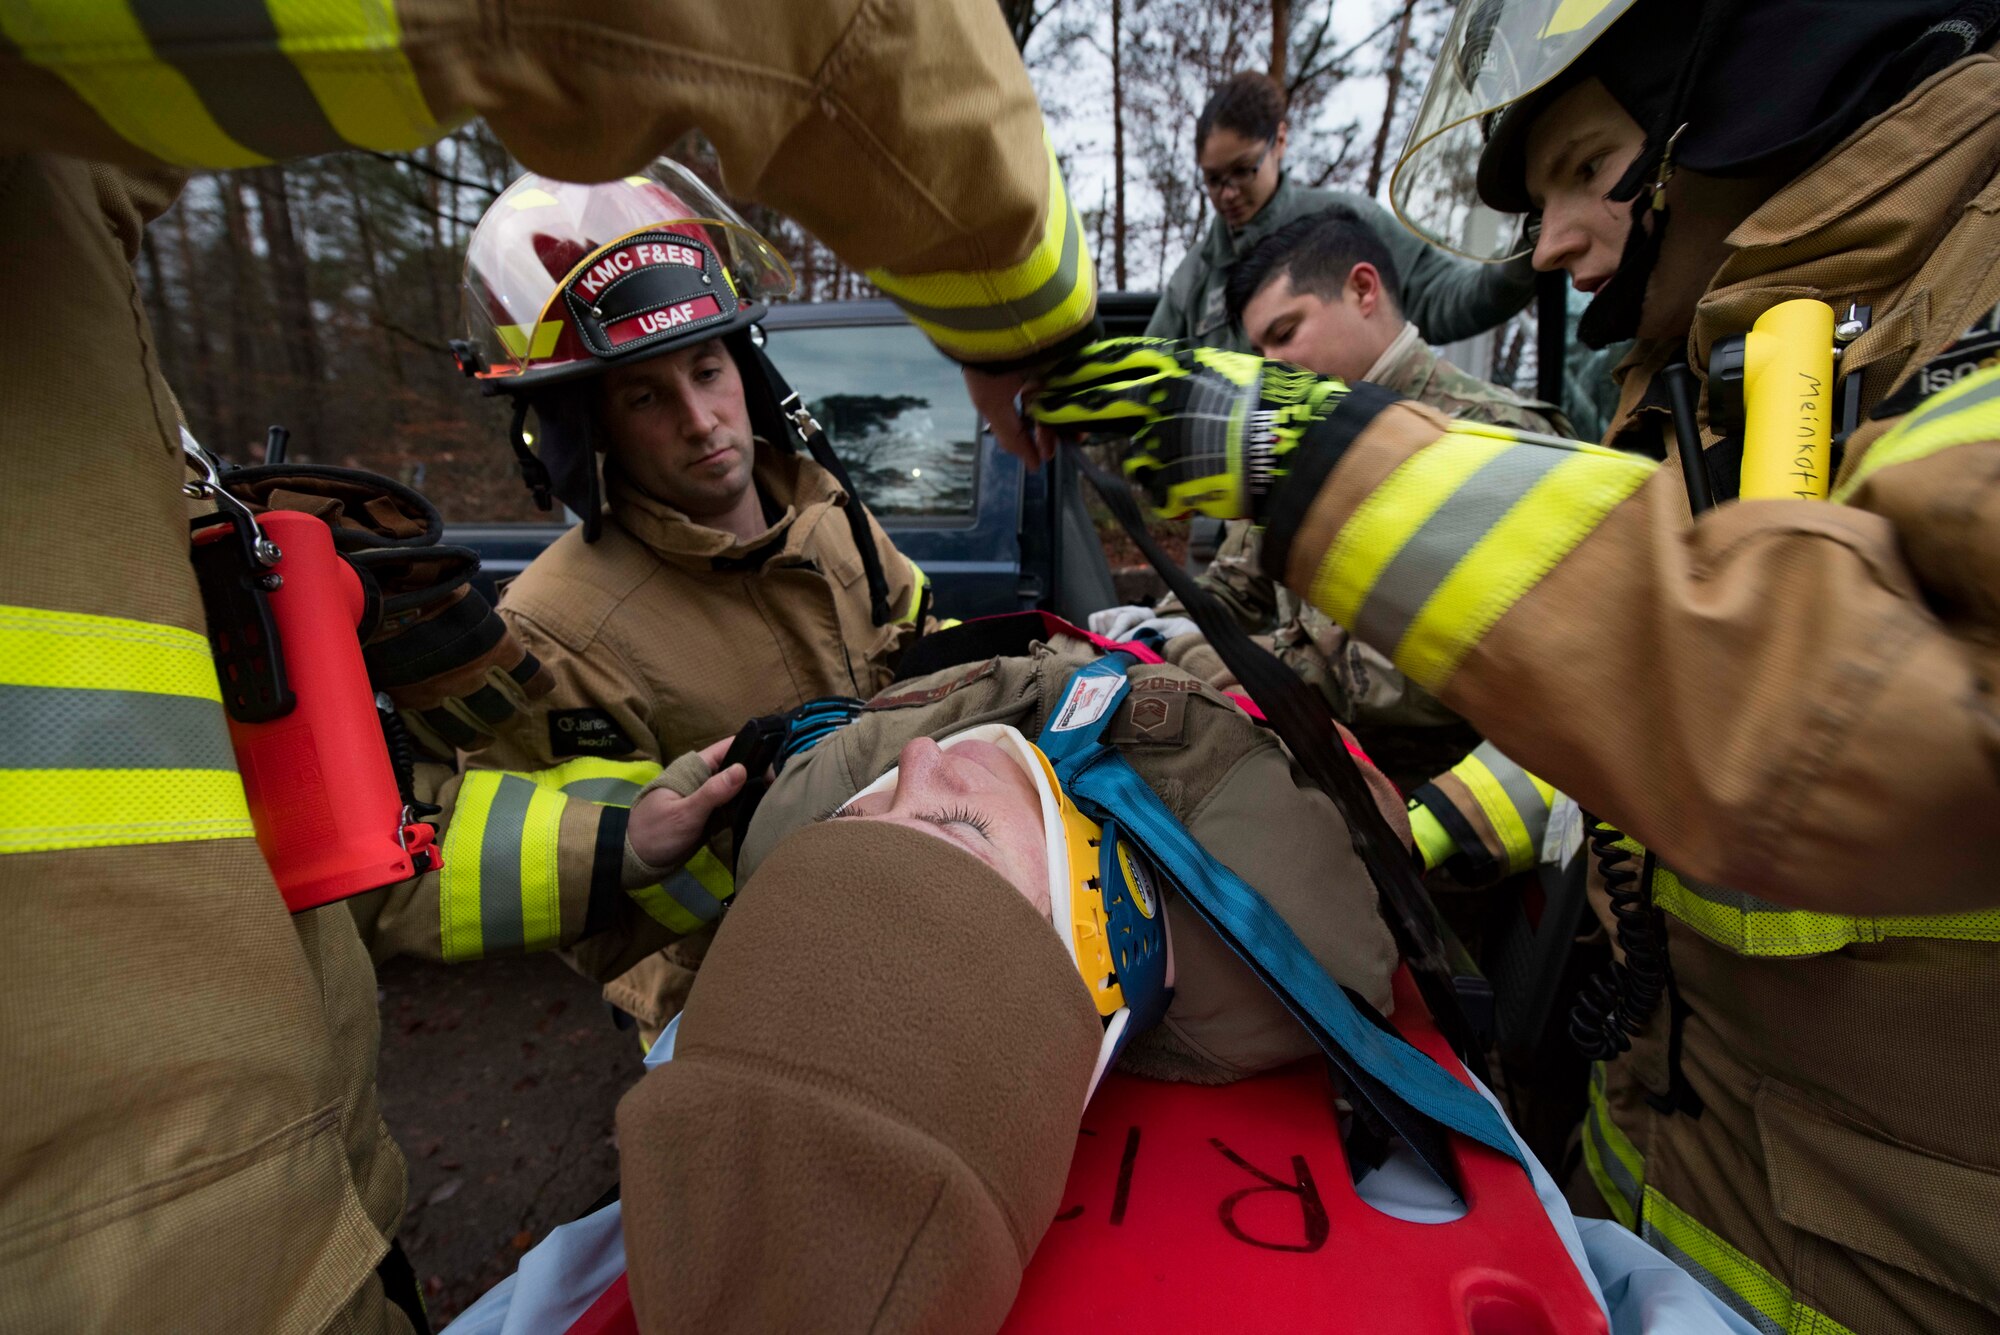 86th Civil Engineer Squadron firefighters strap an Airman playing as a car crash victim to a gurney during Exercise Operation Varsity 19-04 at Ramstein Air Base, Germany, Dec. 12, 2019. Firefighters and 86th Medical Group personnel followed their training by communicating with the victim and keeping her calm while extracting her from the vehicle and transporting her to an ambulance.